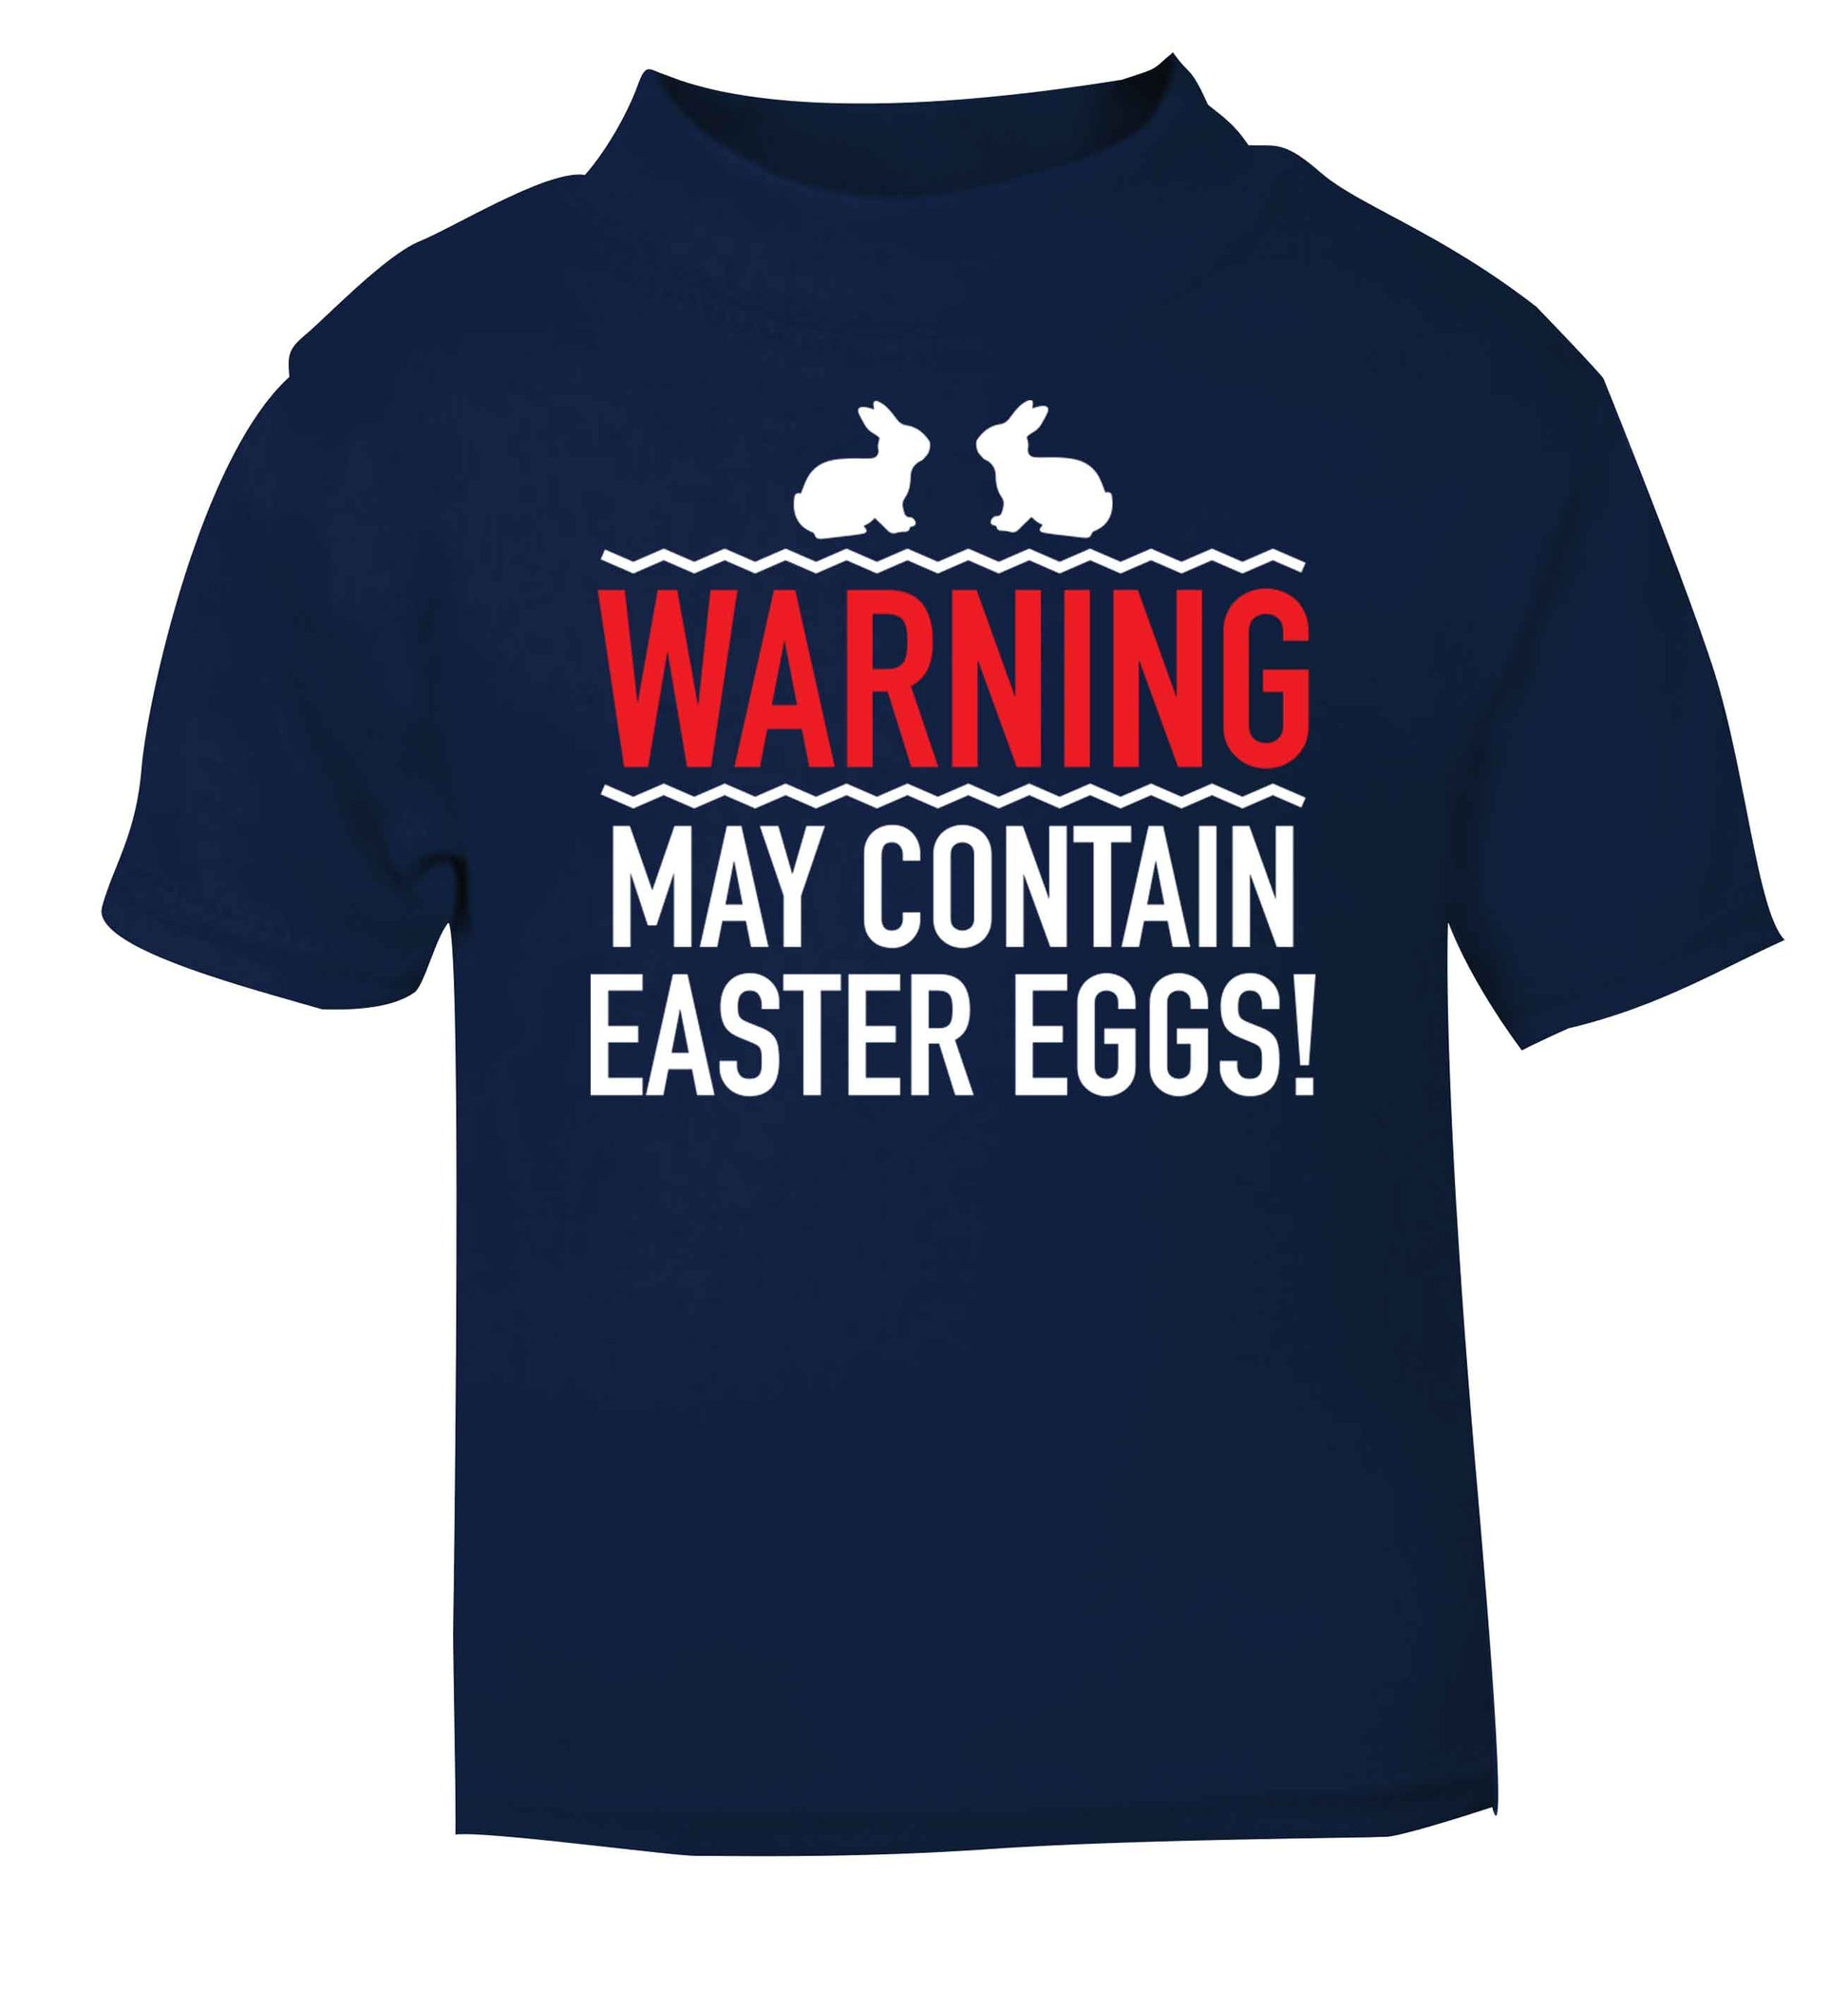 Warning may contain Easter eggs navy baby toddler Tshirt 2 Years